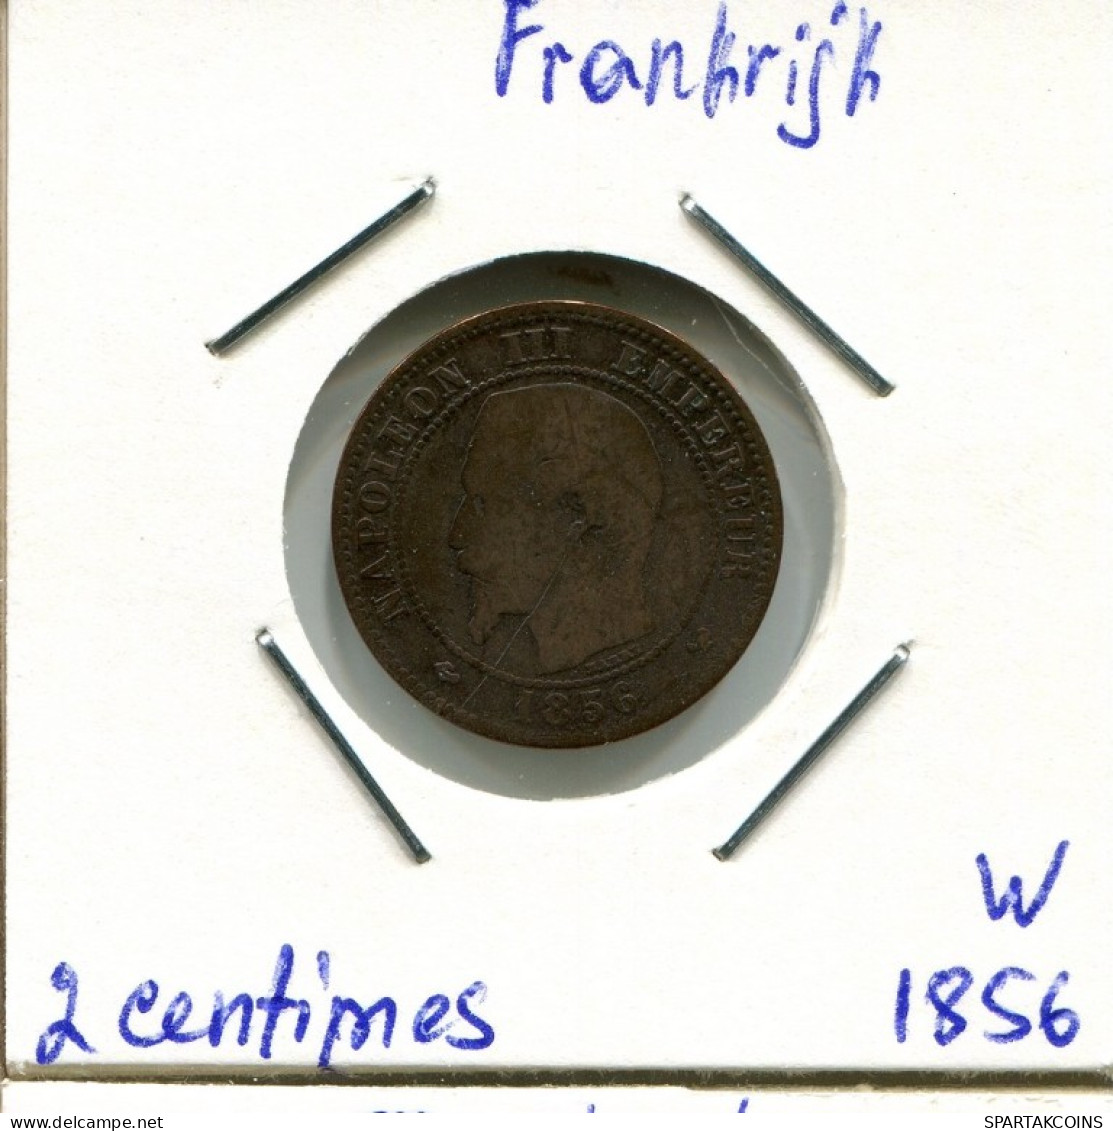 2 CENTIMES 1856 W FRANKREICH FRANCE Napoleon III Imperator #AK978.D.A - 2 Centimes